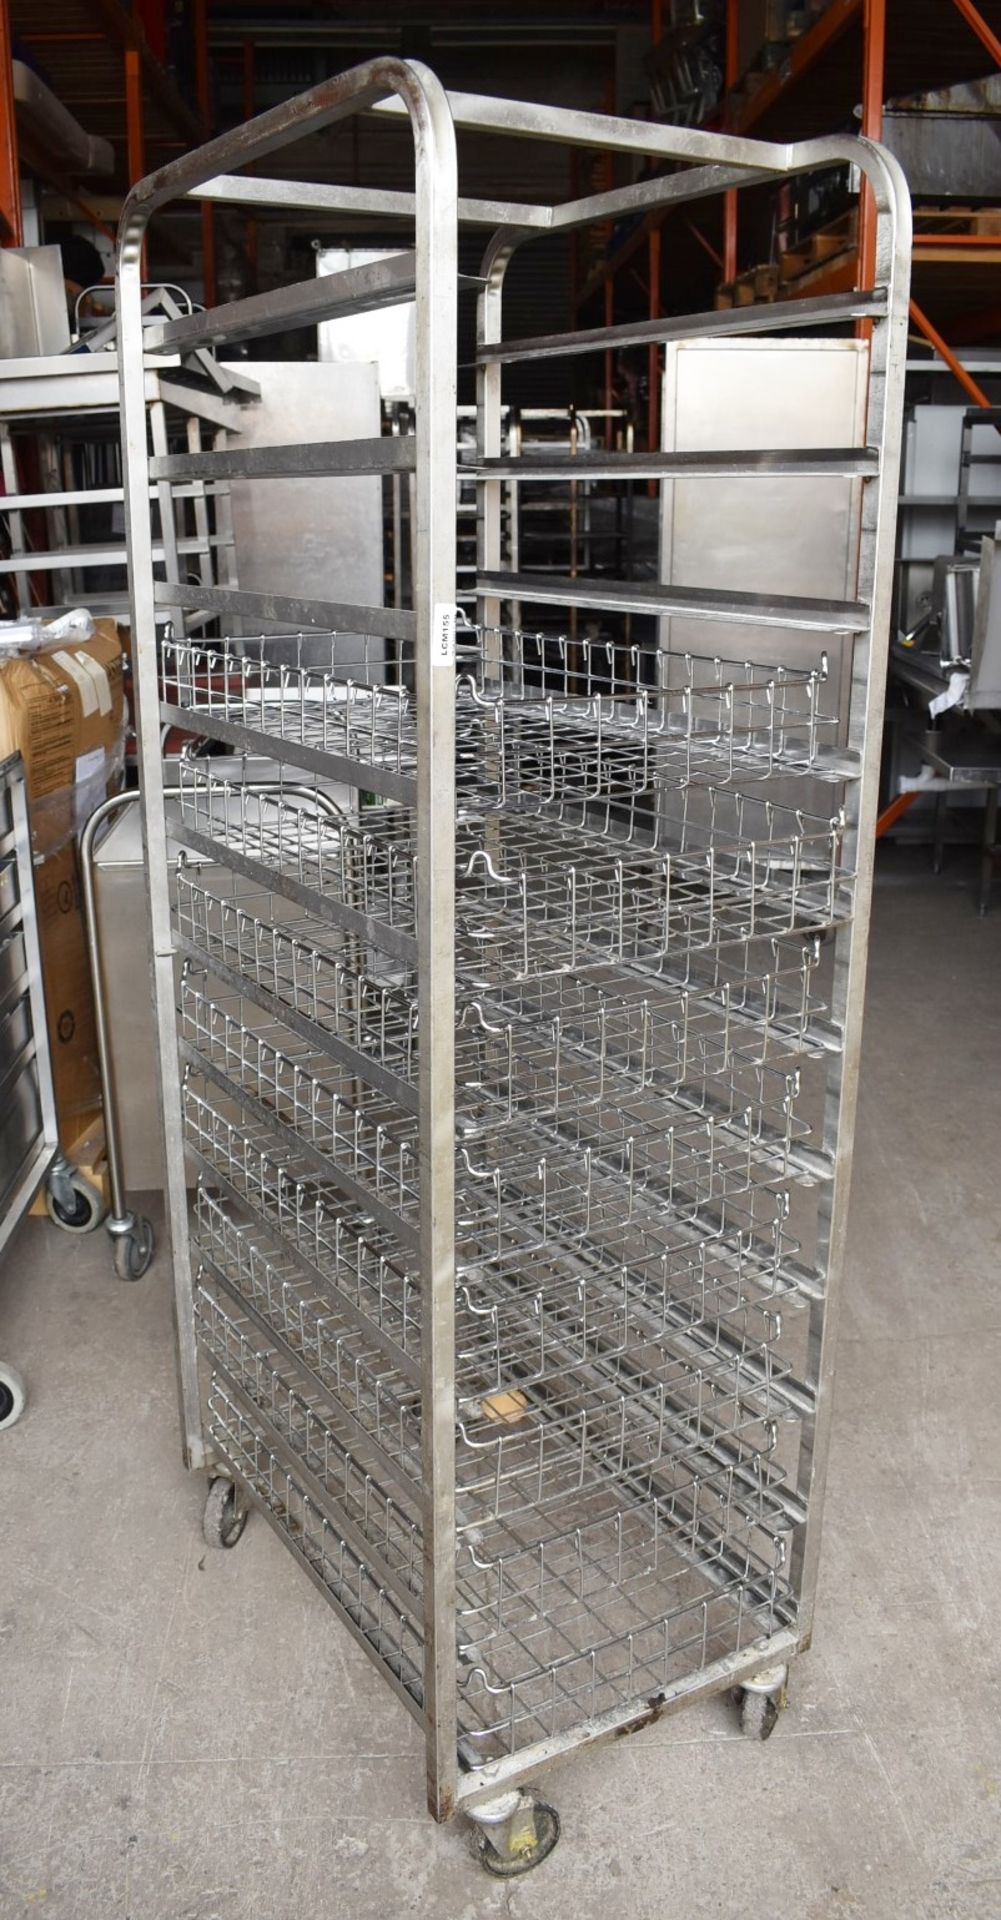 1 x Bakers 11 Tier Mobile Tray Rack With 8 Removable Wire Baskets - Stainless Steel With Castors - - Image 2 of 6